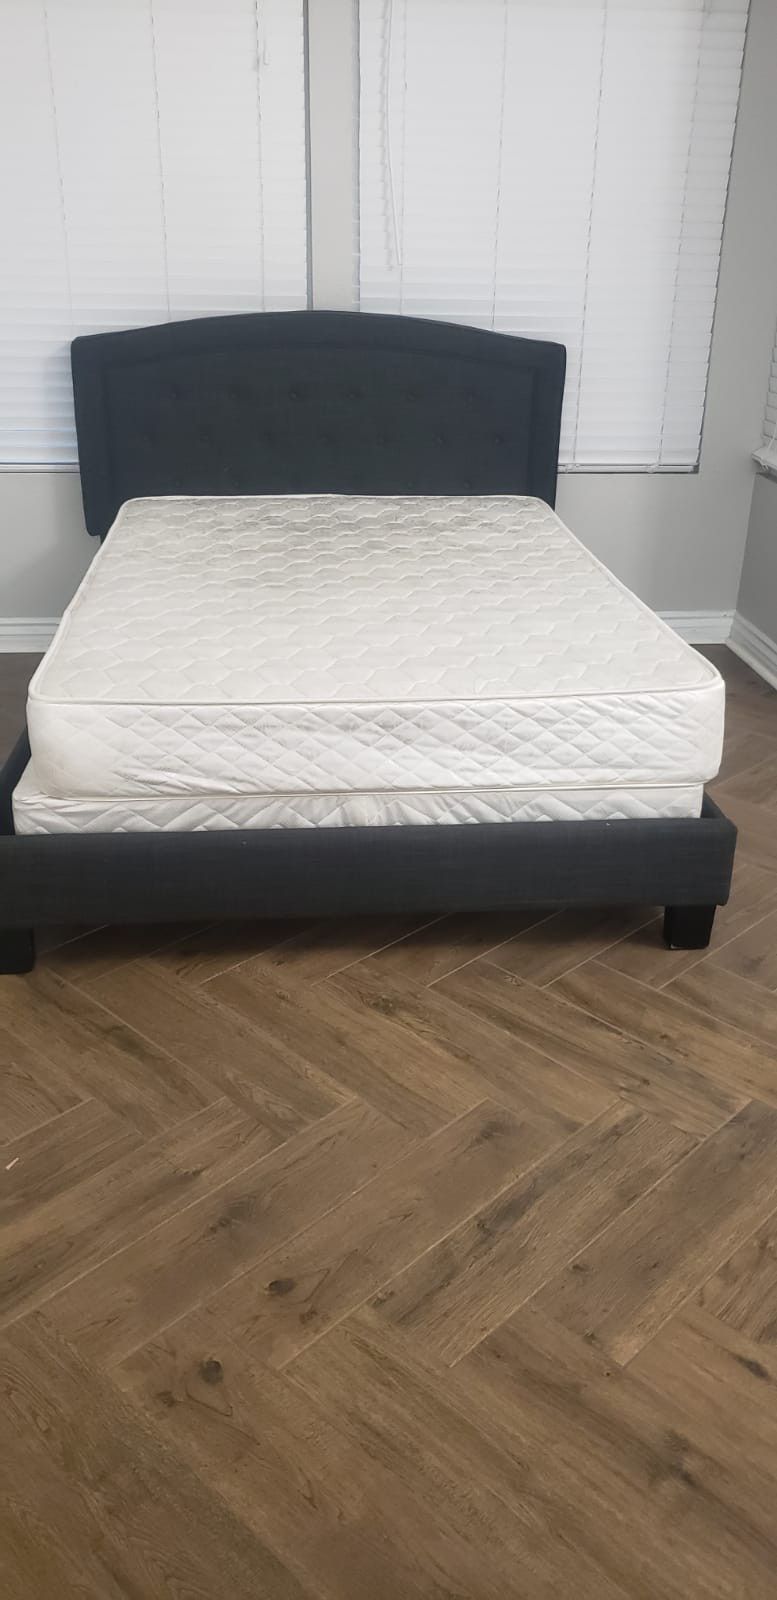 Full size bed with matress and box spring